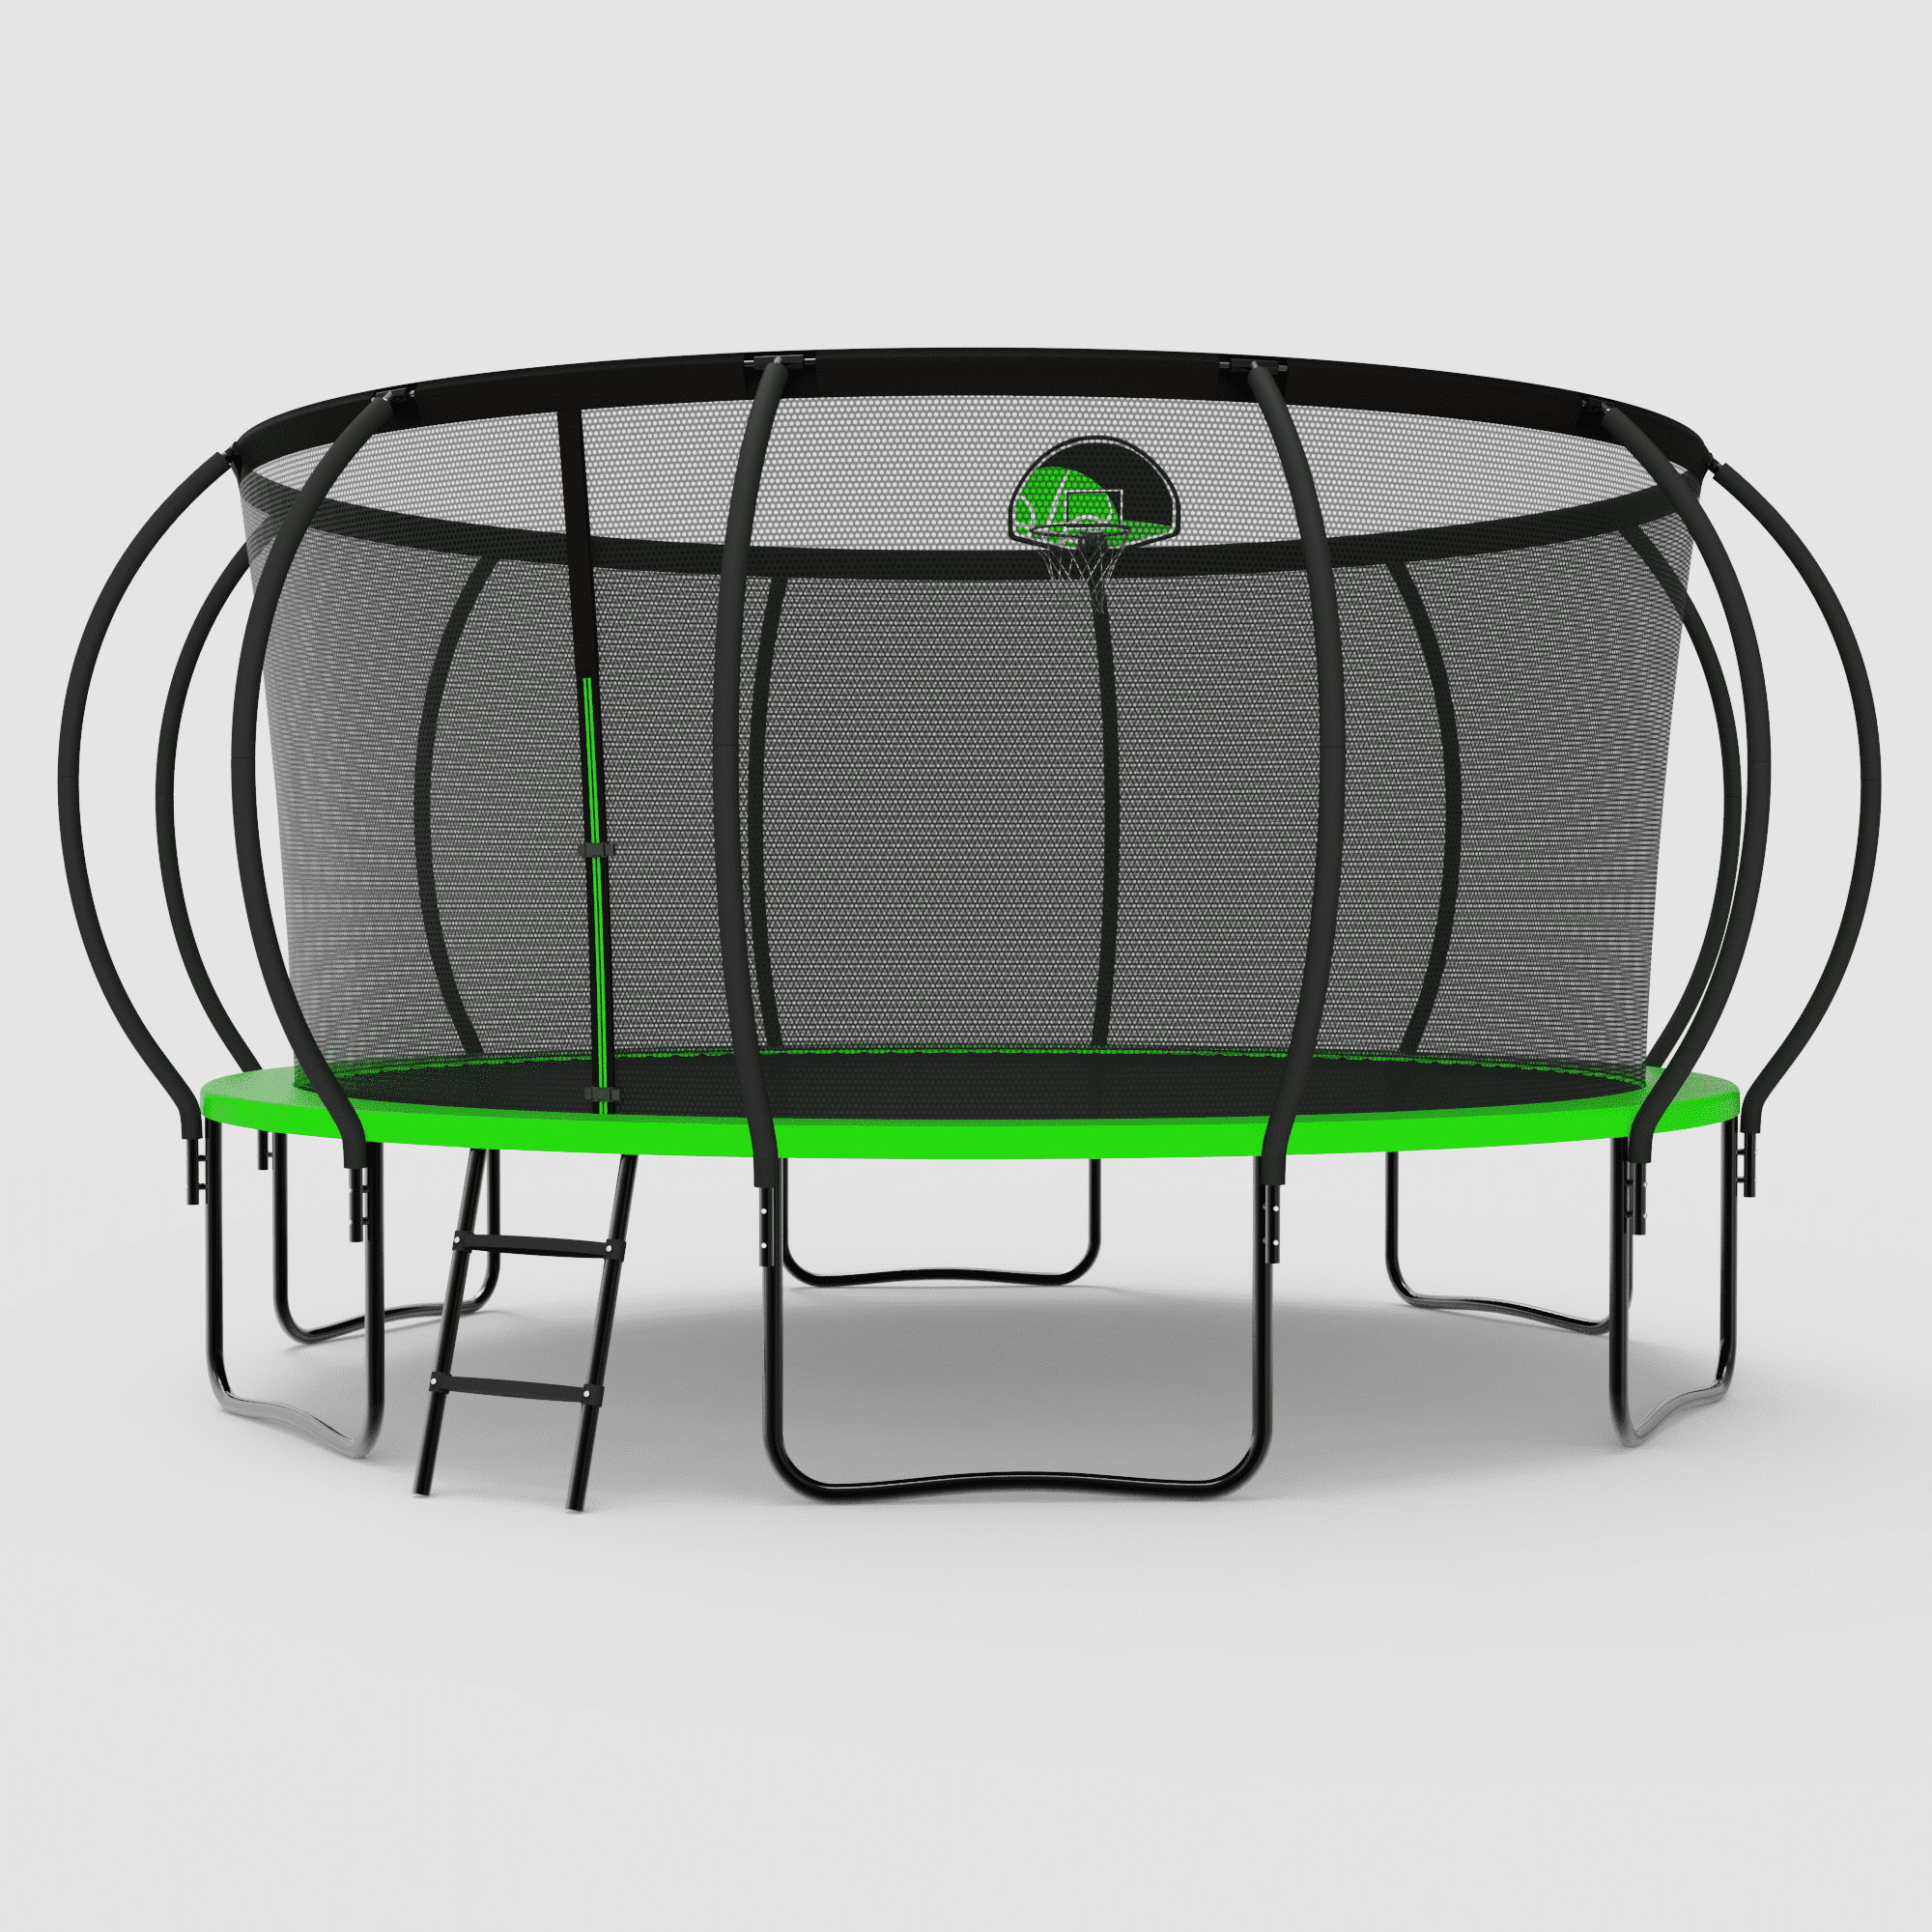 DreamBuck Upgraded Trampoline 12FT 14FT 15FT 16FT for Kids and Adults ...